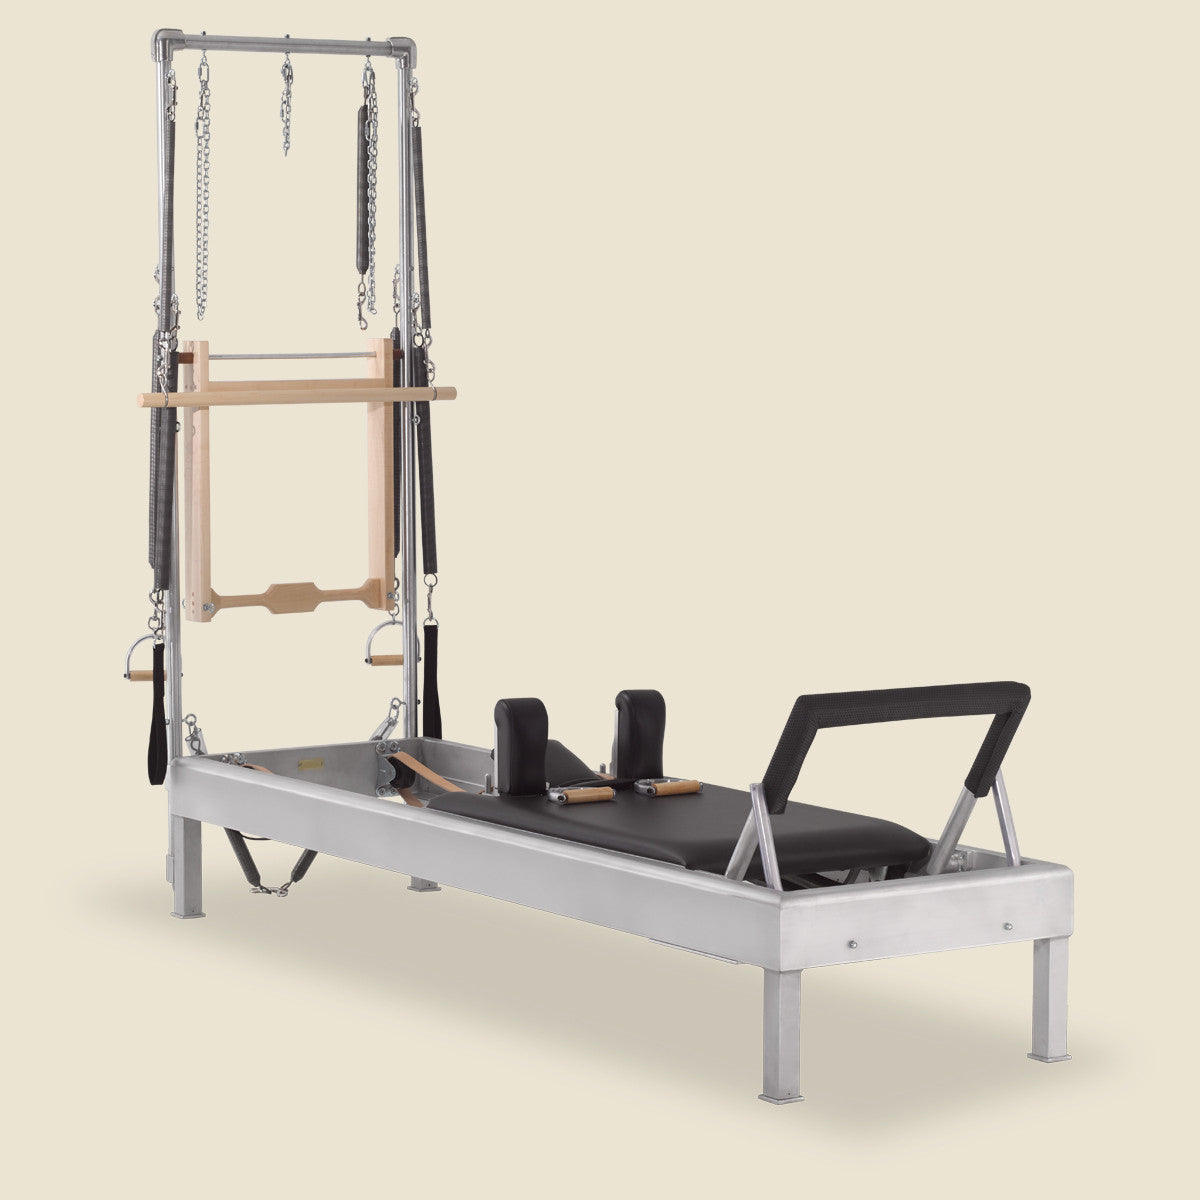 View All Our Products - Gratz™ Pilates